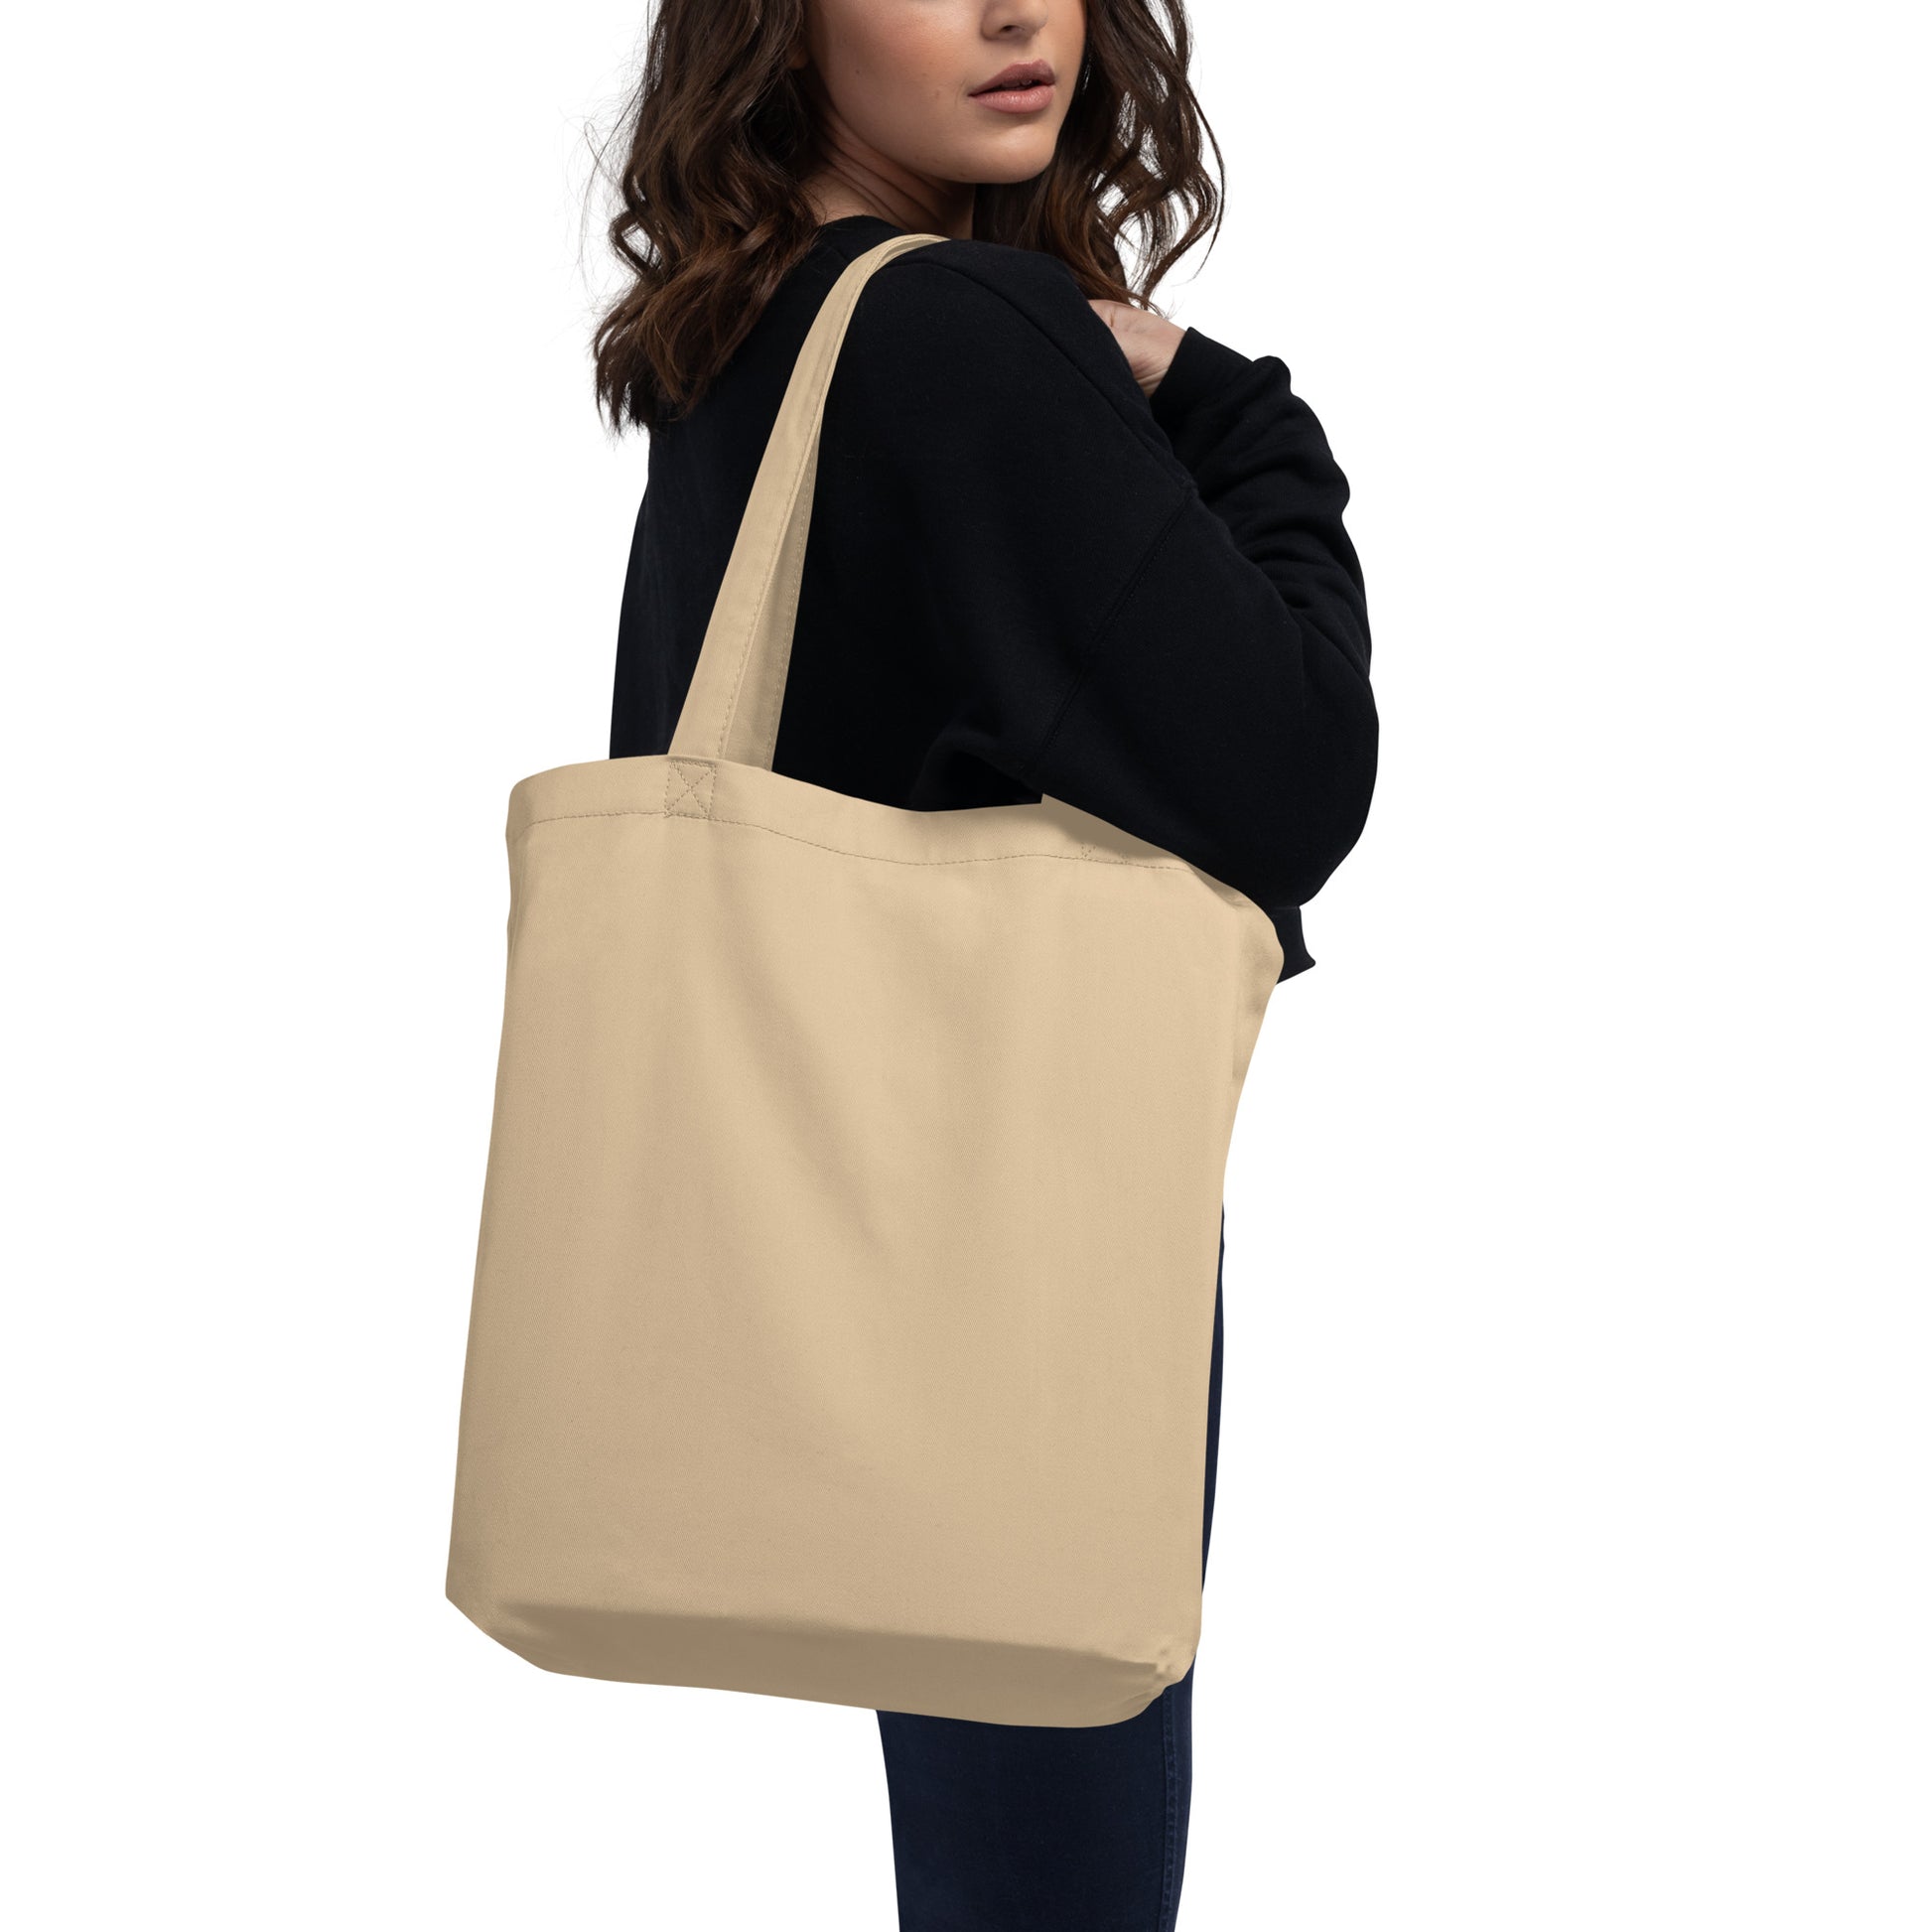 Aviation Gift Organic Tote - Black • AKL Auckland • YHM Designs - Image 06